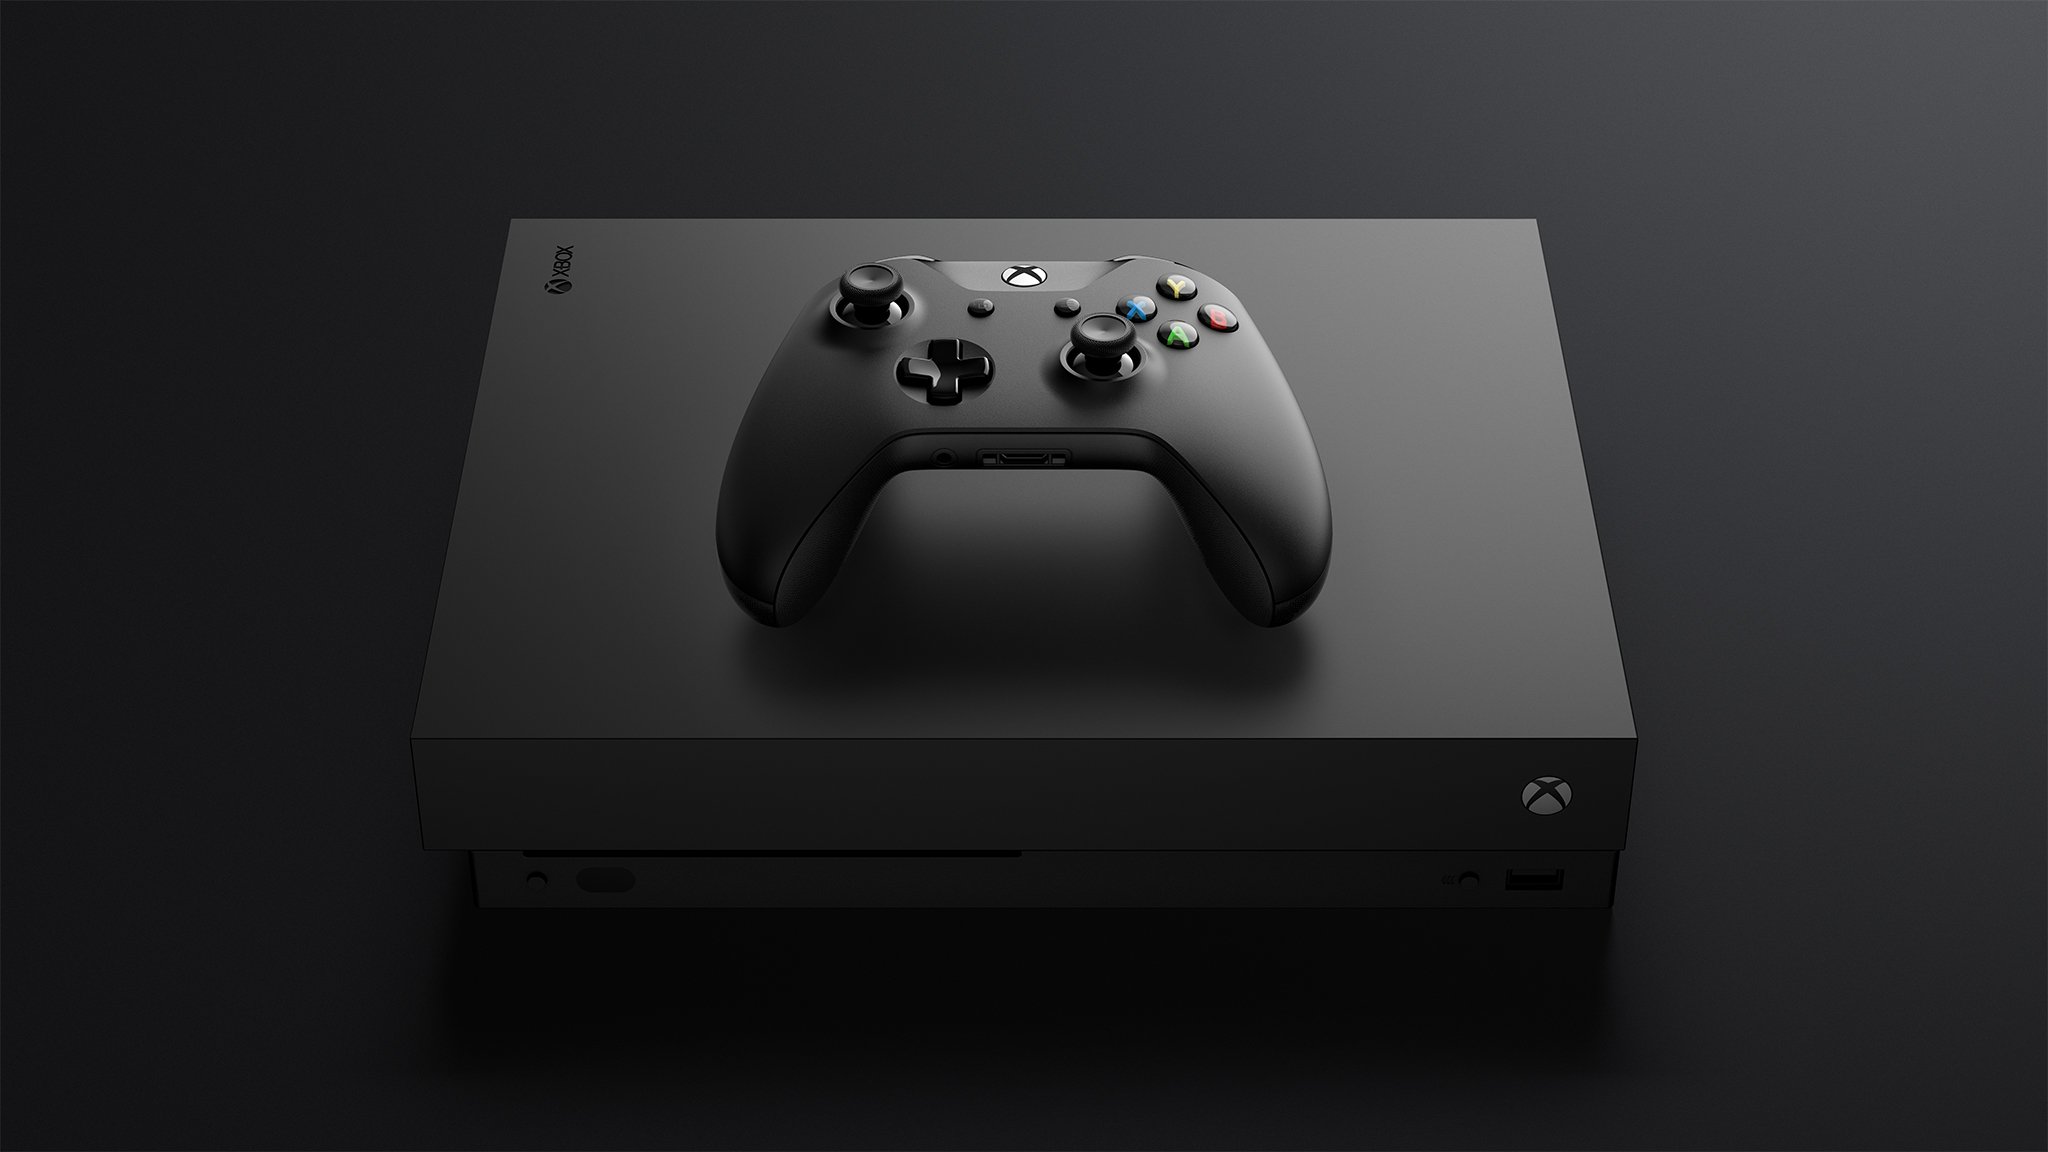 Xbox One X Project Scorpio Edition appears to be sold out at major retailers